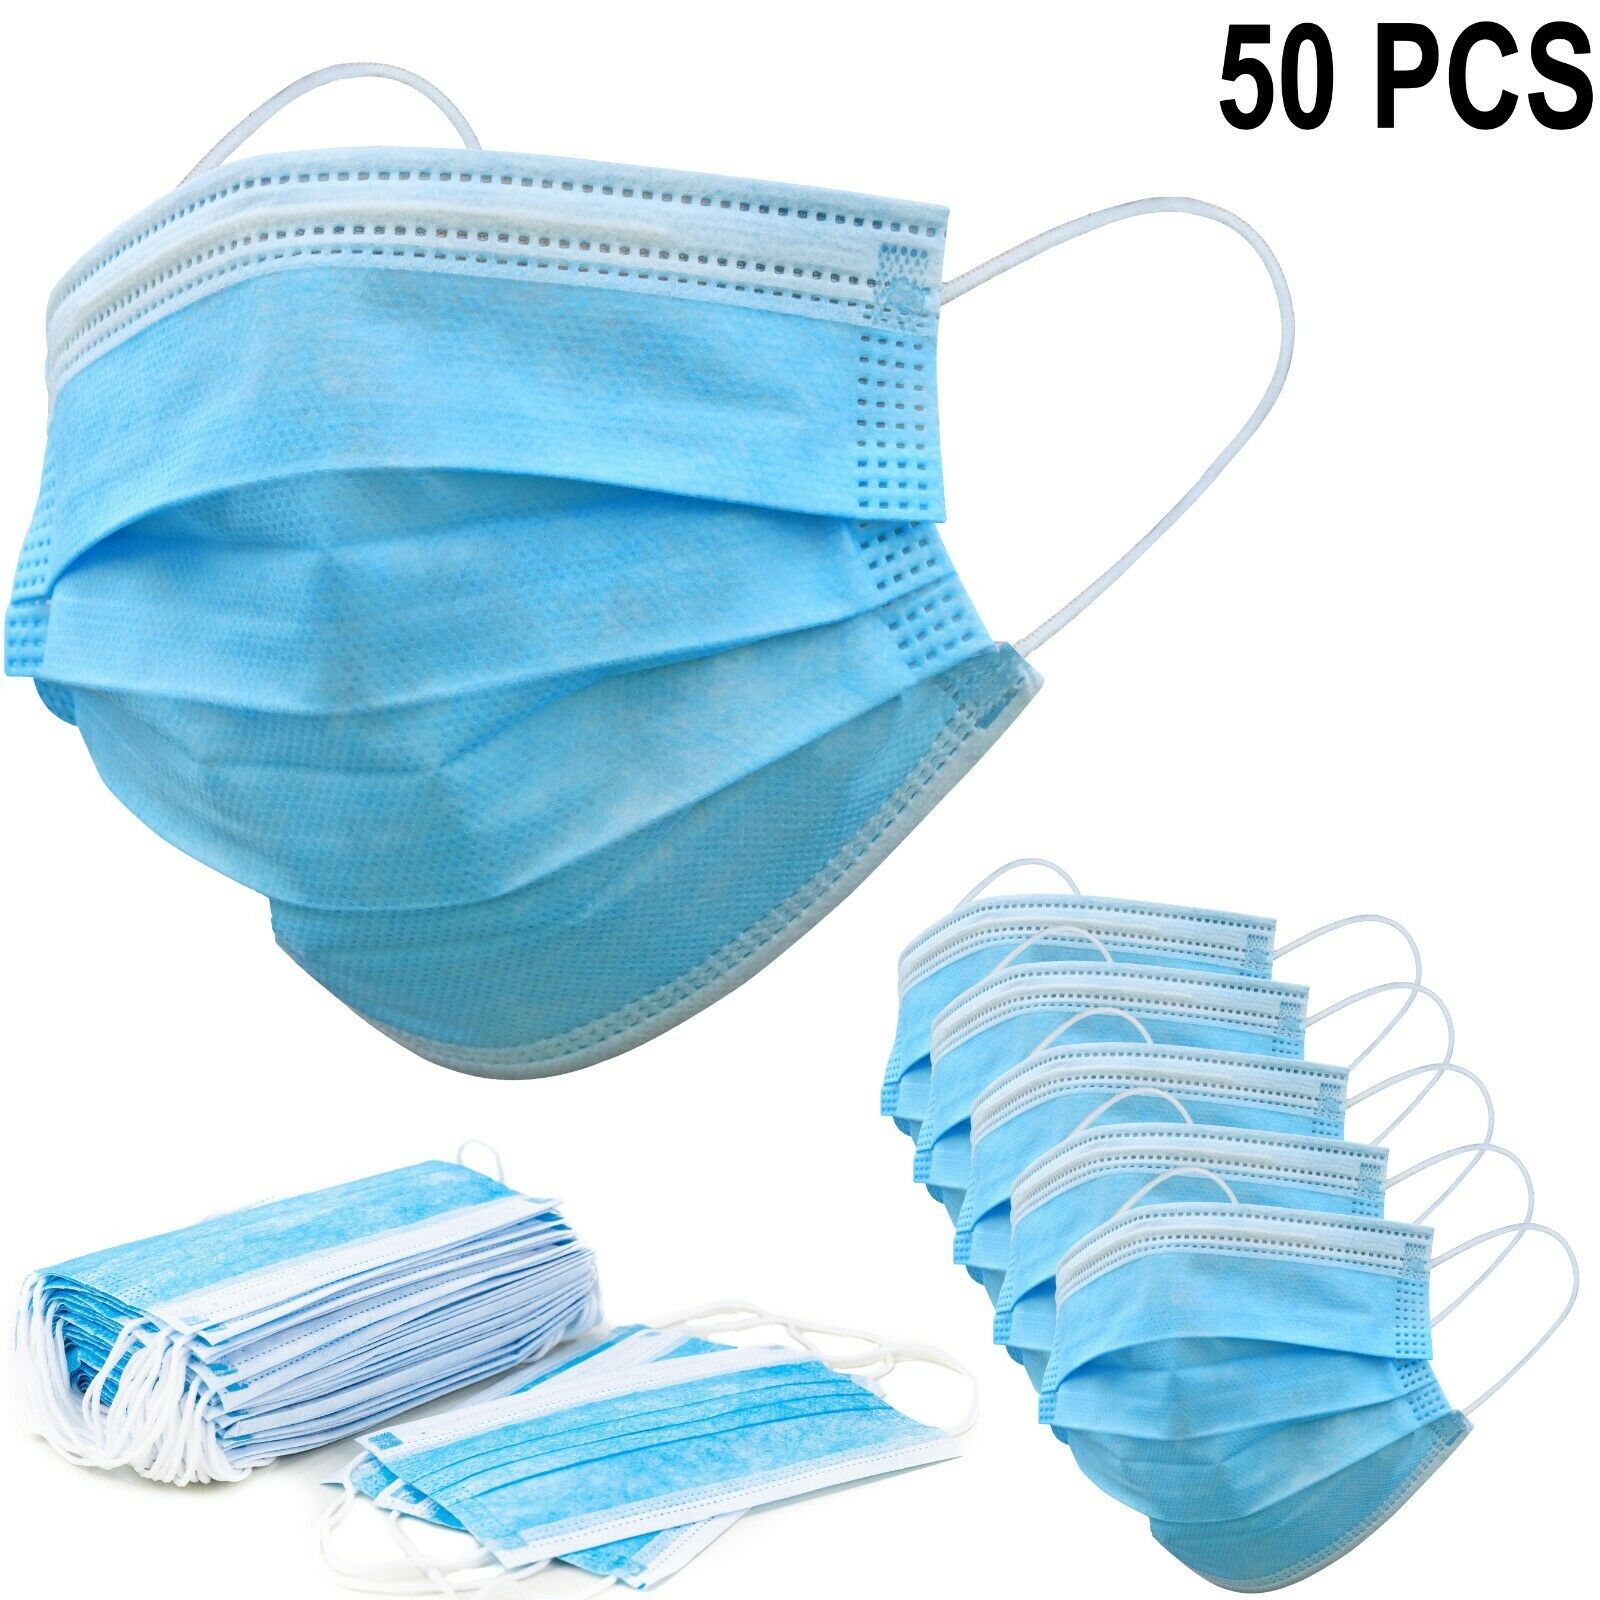 50 Pcs Face Mask Non Medical Surgical 3-ply Ear Loop Disposable Mouth Cover